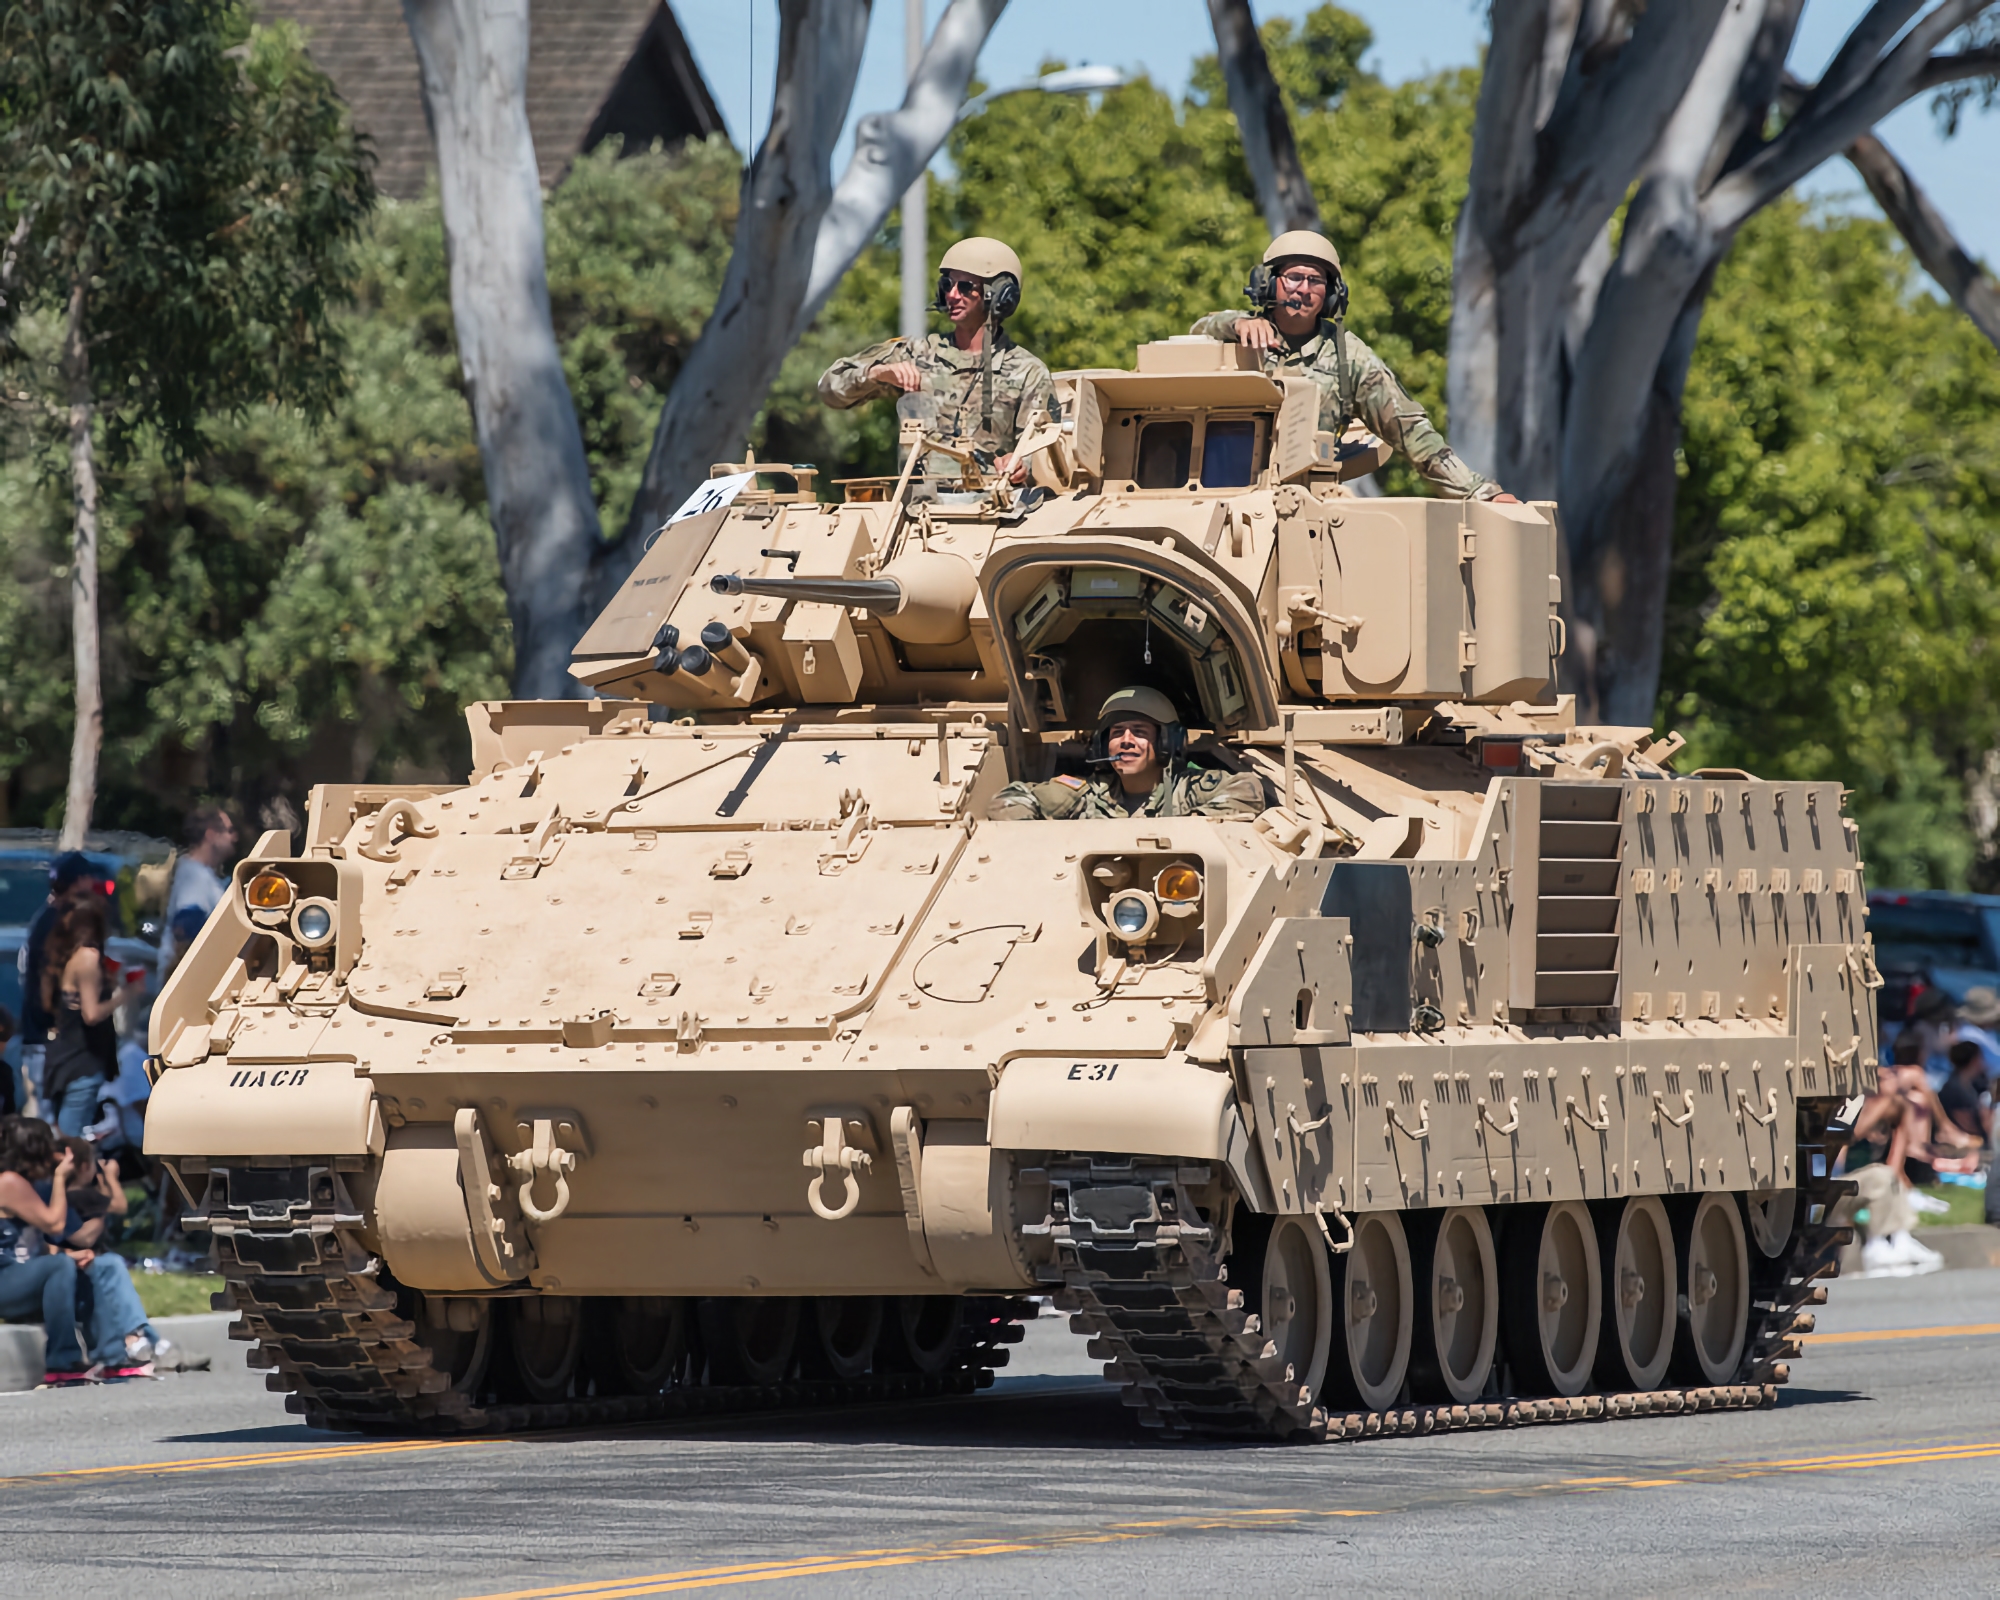 To replace the BMP-1 and M113: the US will hand over 300 M2A2 Bradley ODS-SA infantry fighting vehicles to Greece